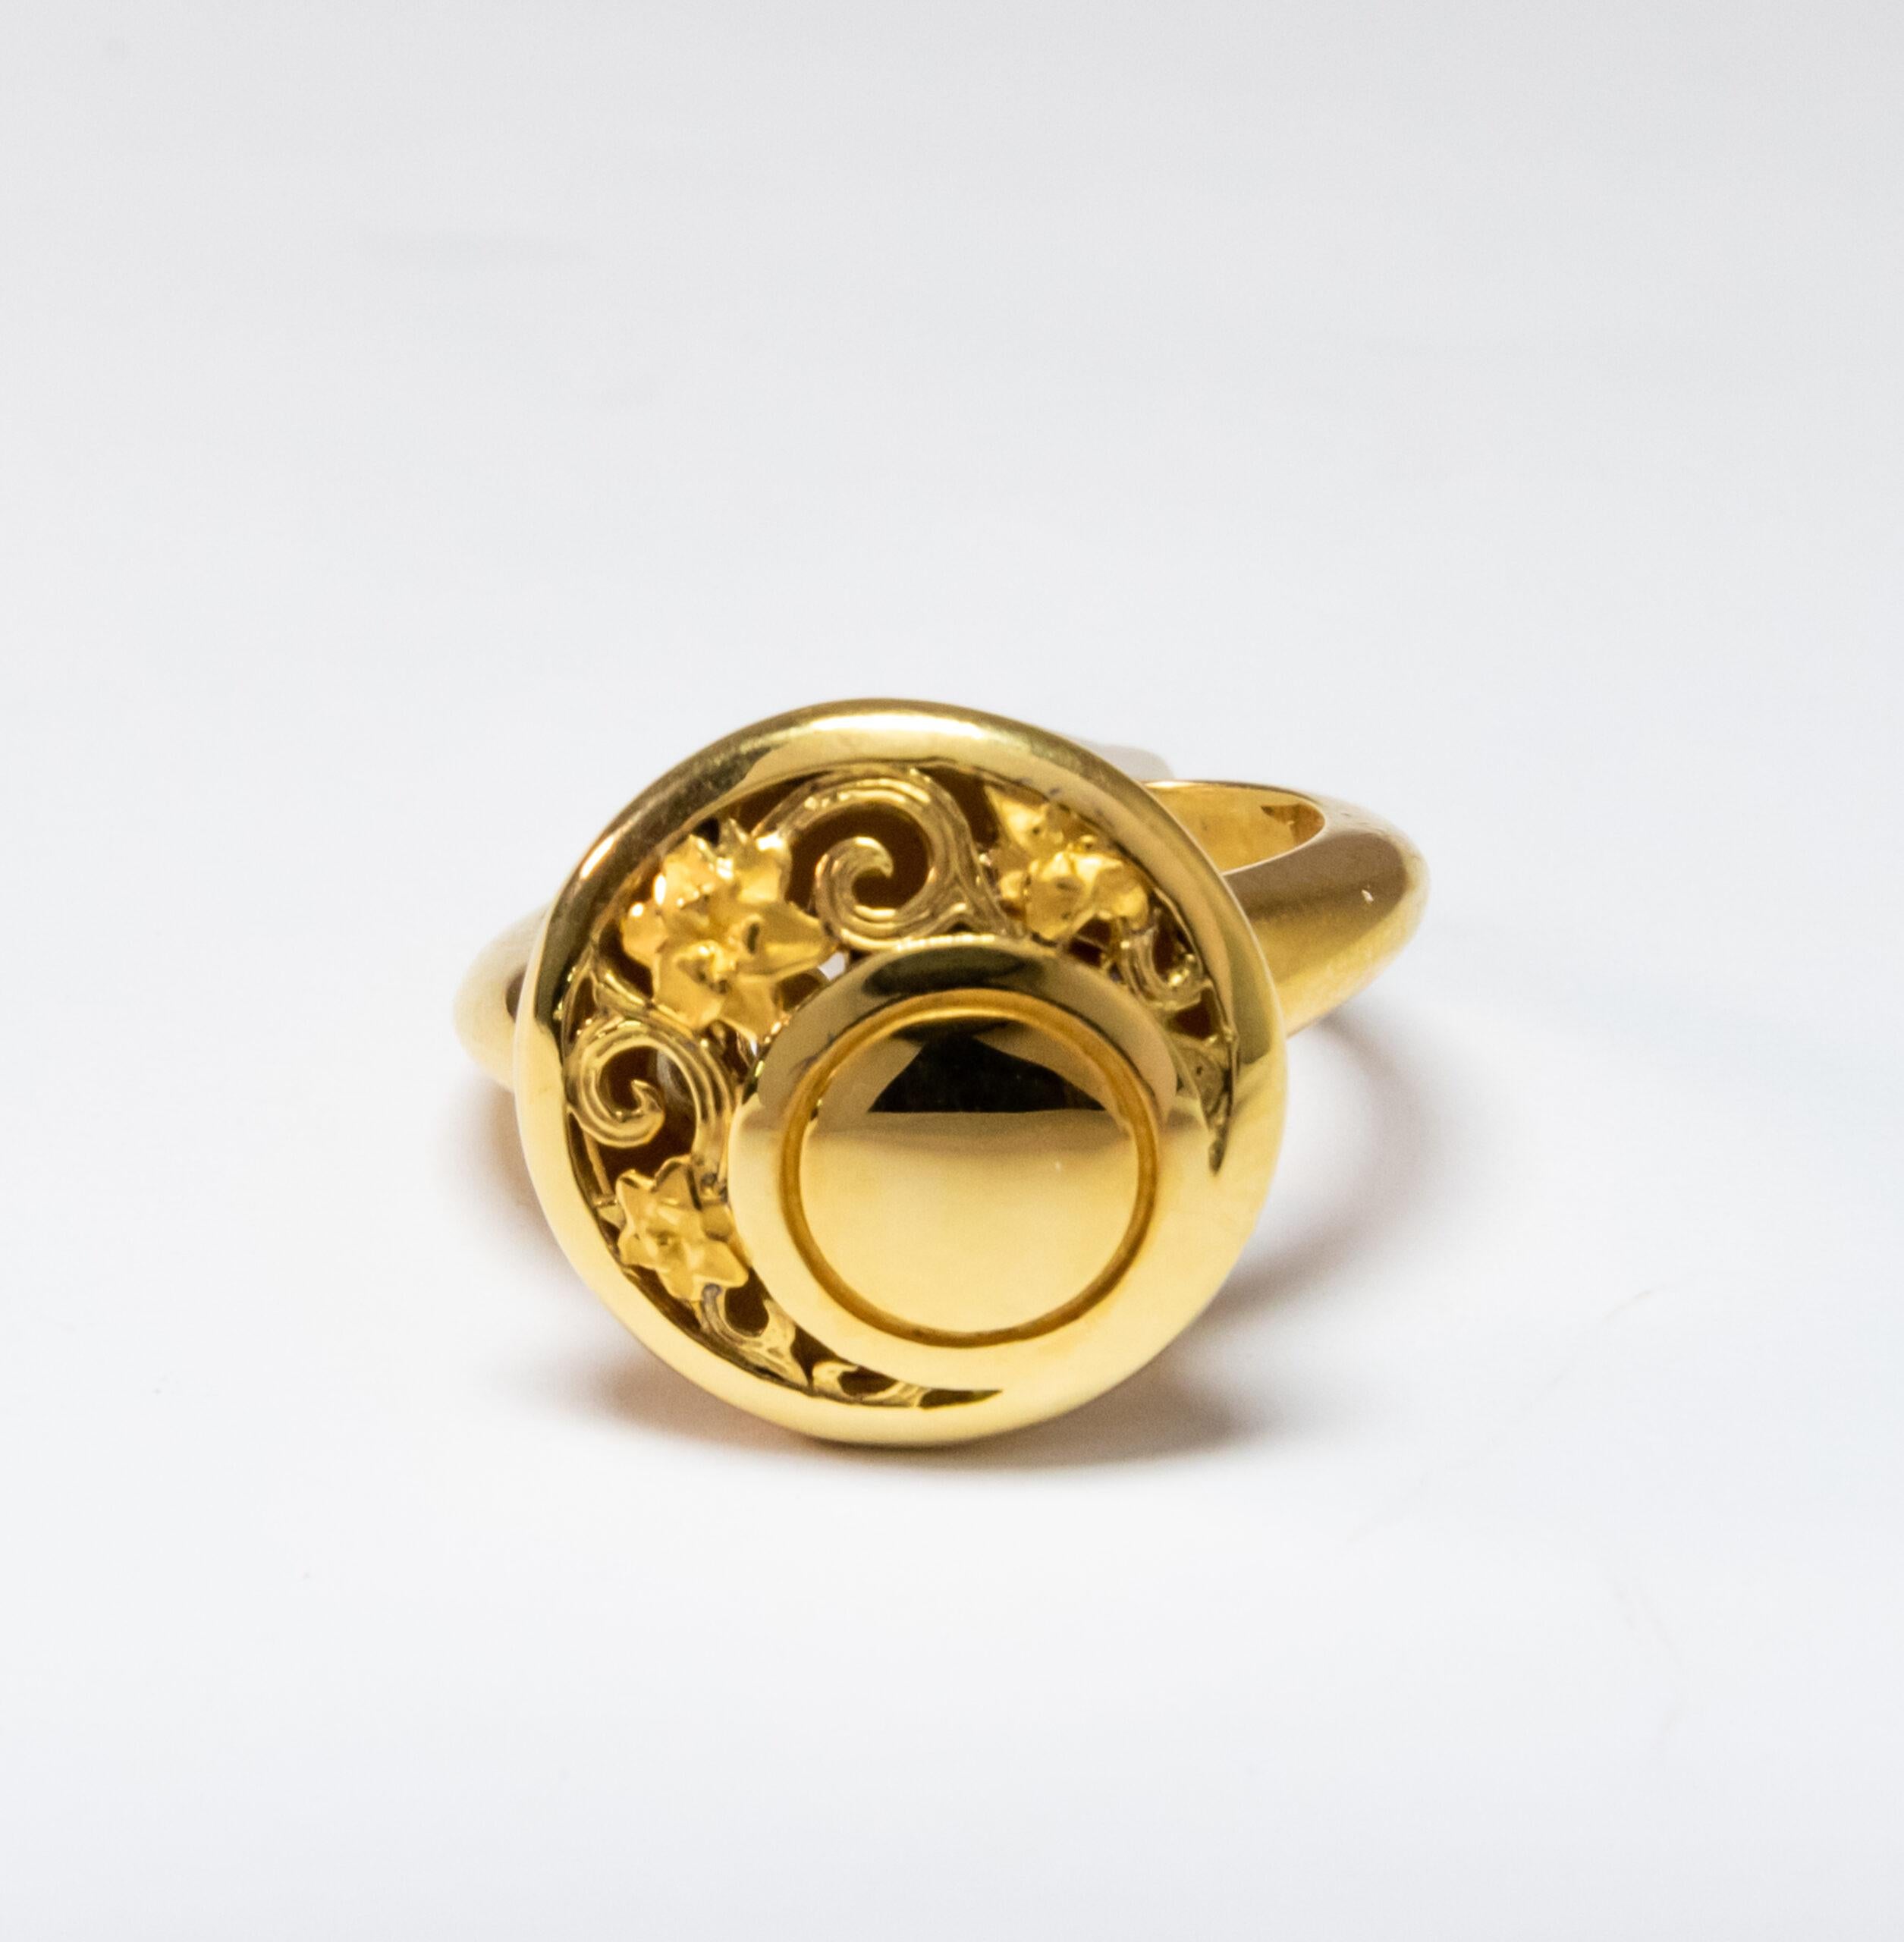 This ring is made of 18K Yellow Gold. It is decorated with a floral pattern.

Size – 54 (6.75 US), 53 (6.25 US)